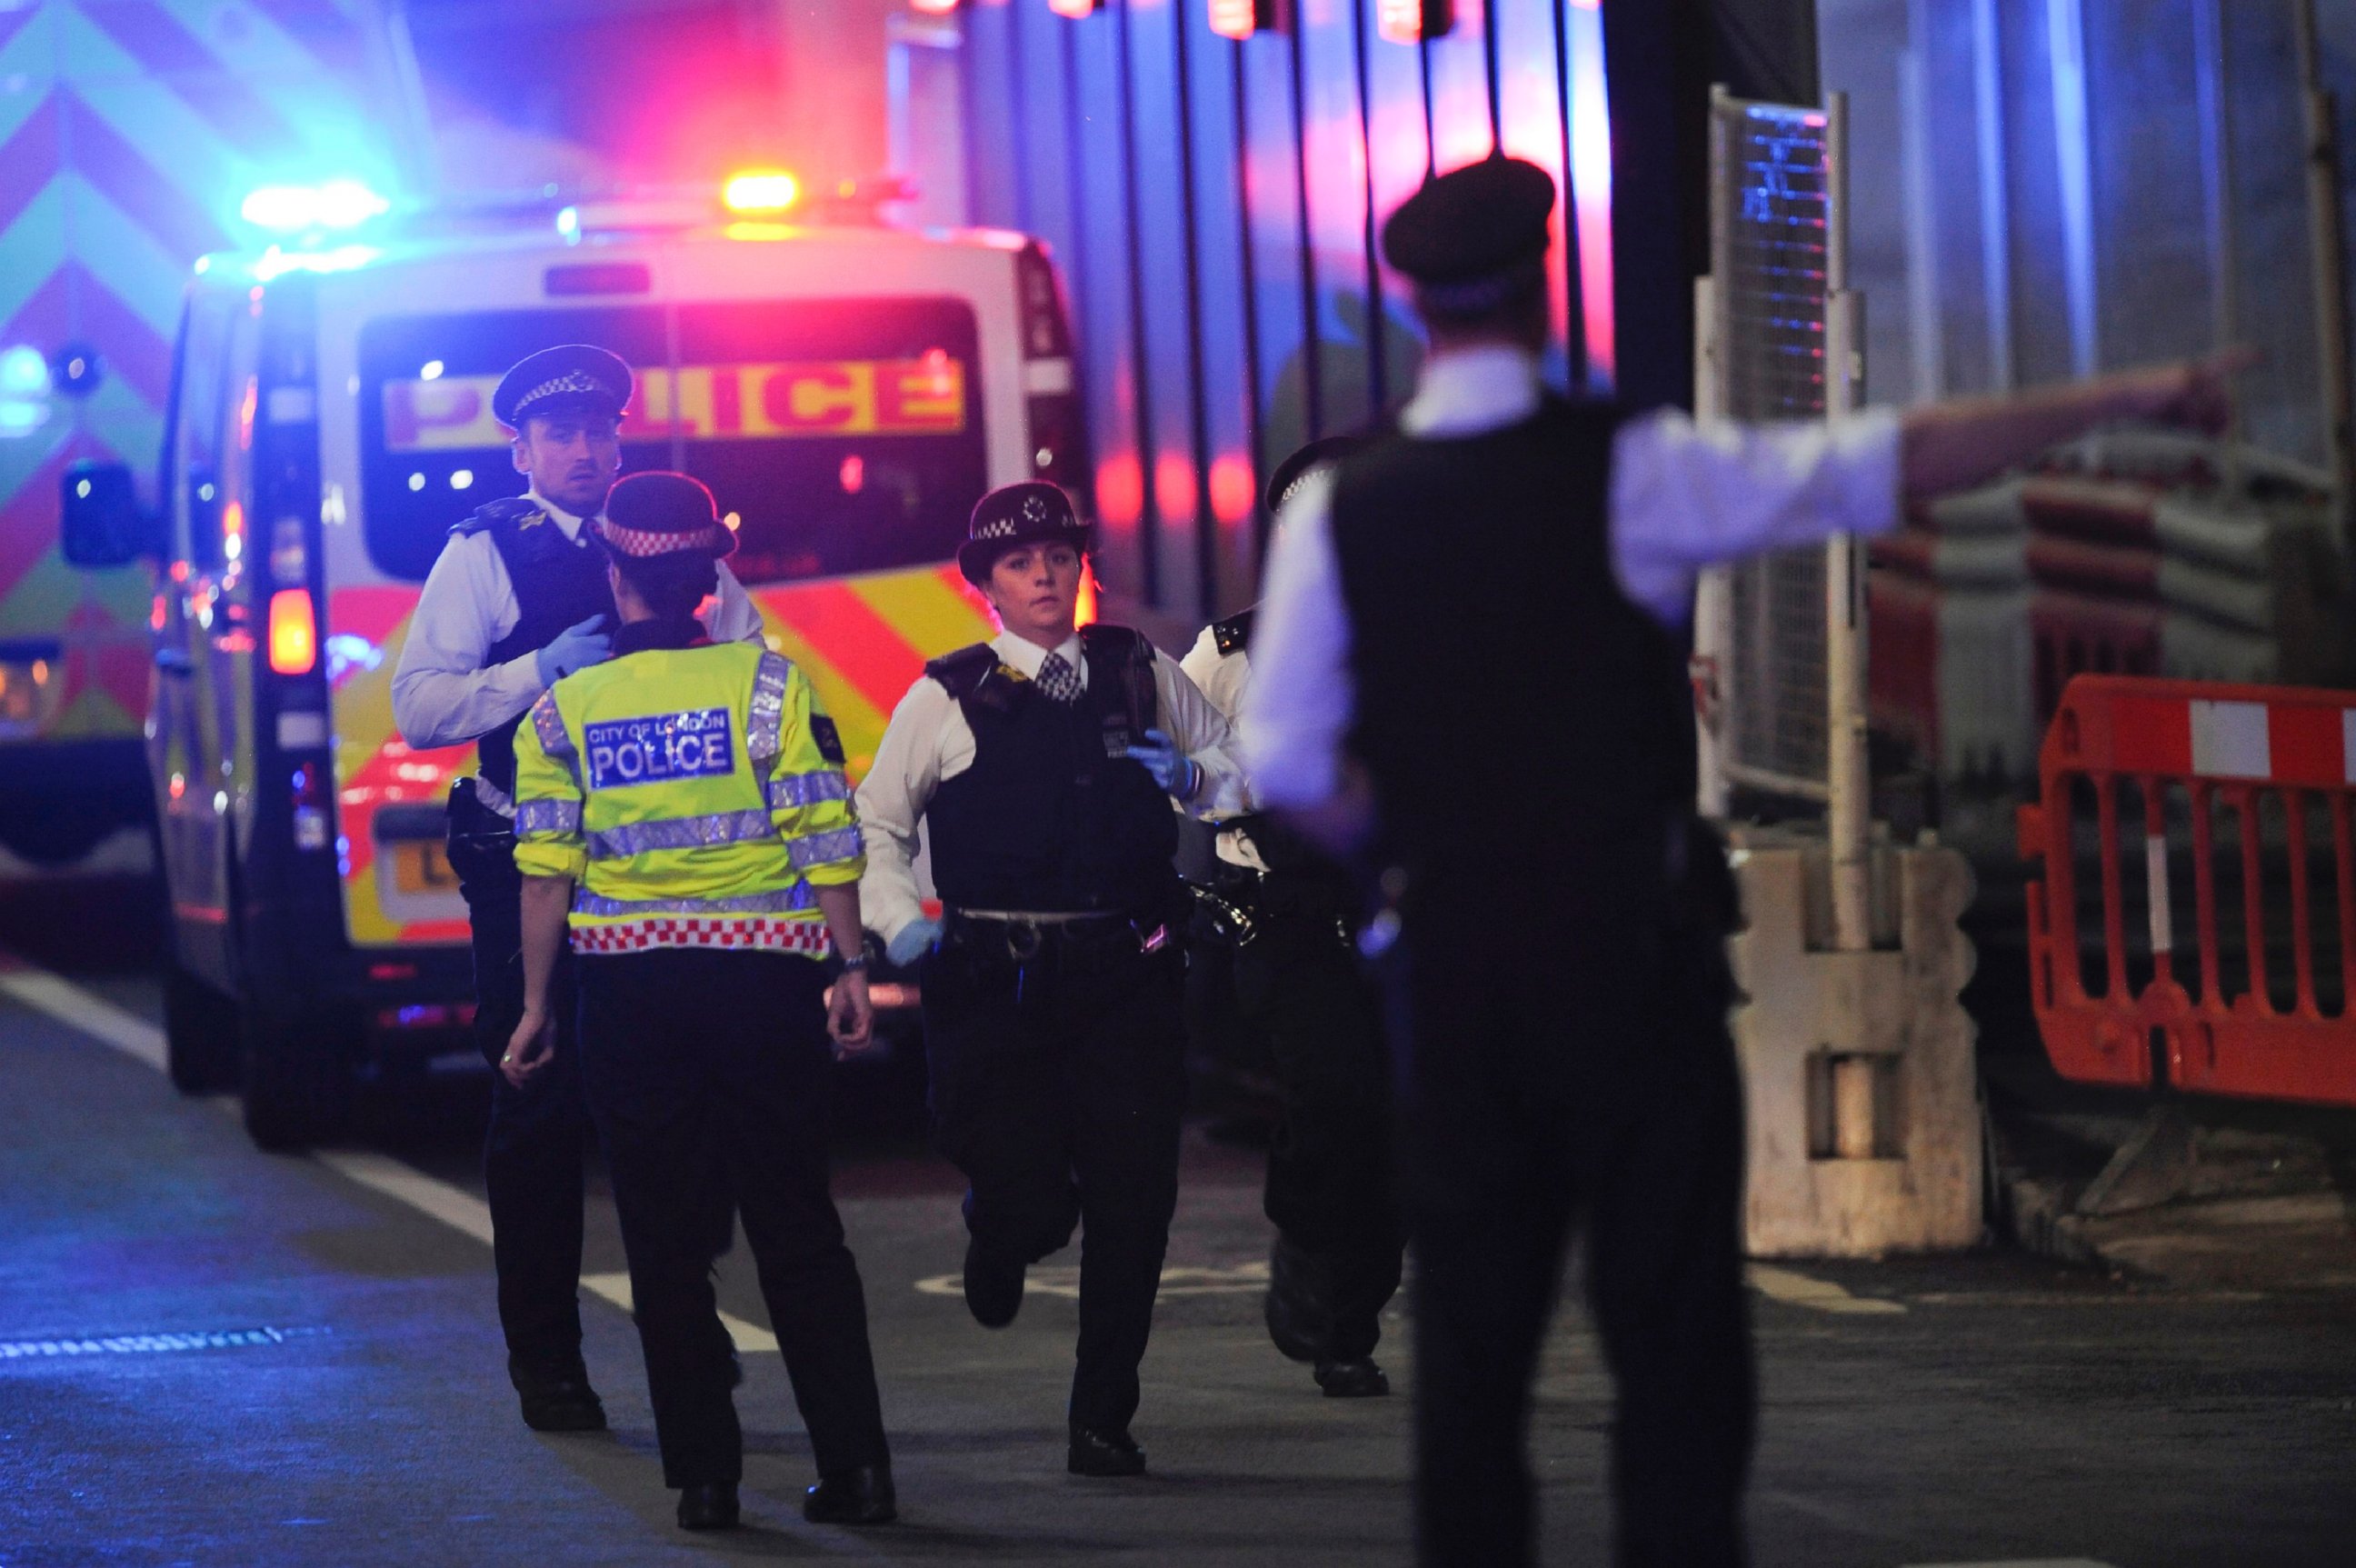 ISIS claims responsibility for London Bridge attack picture